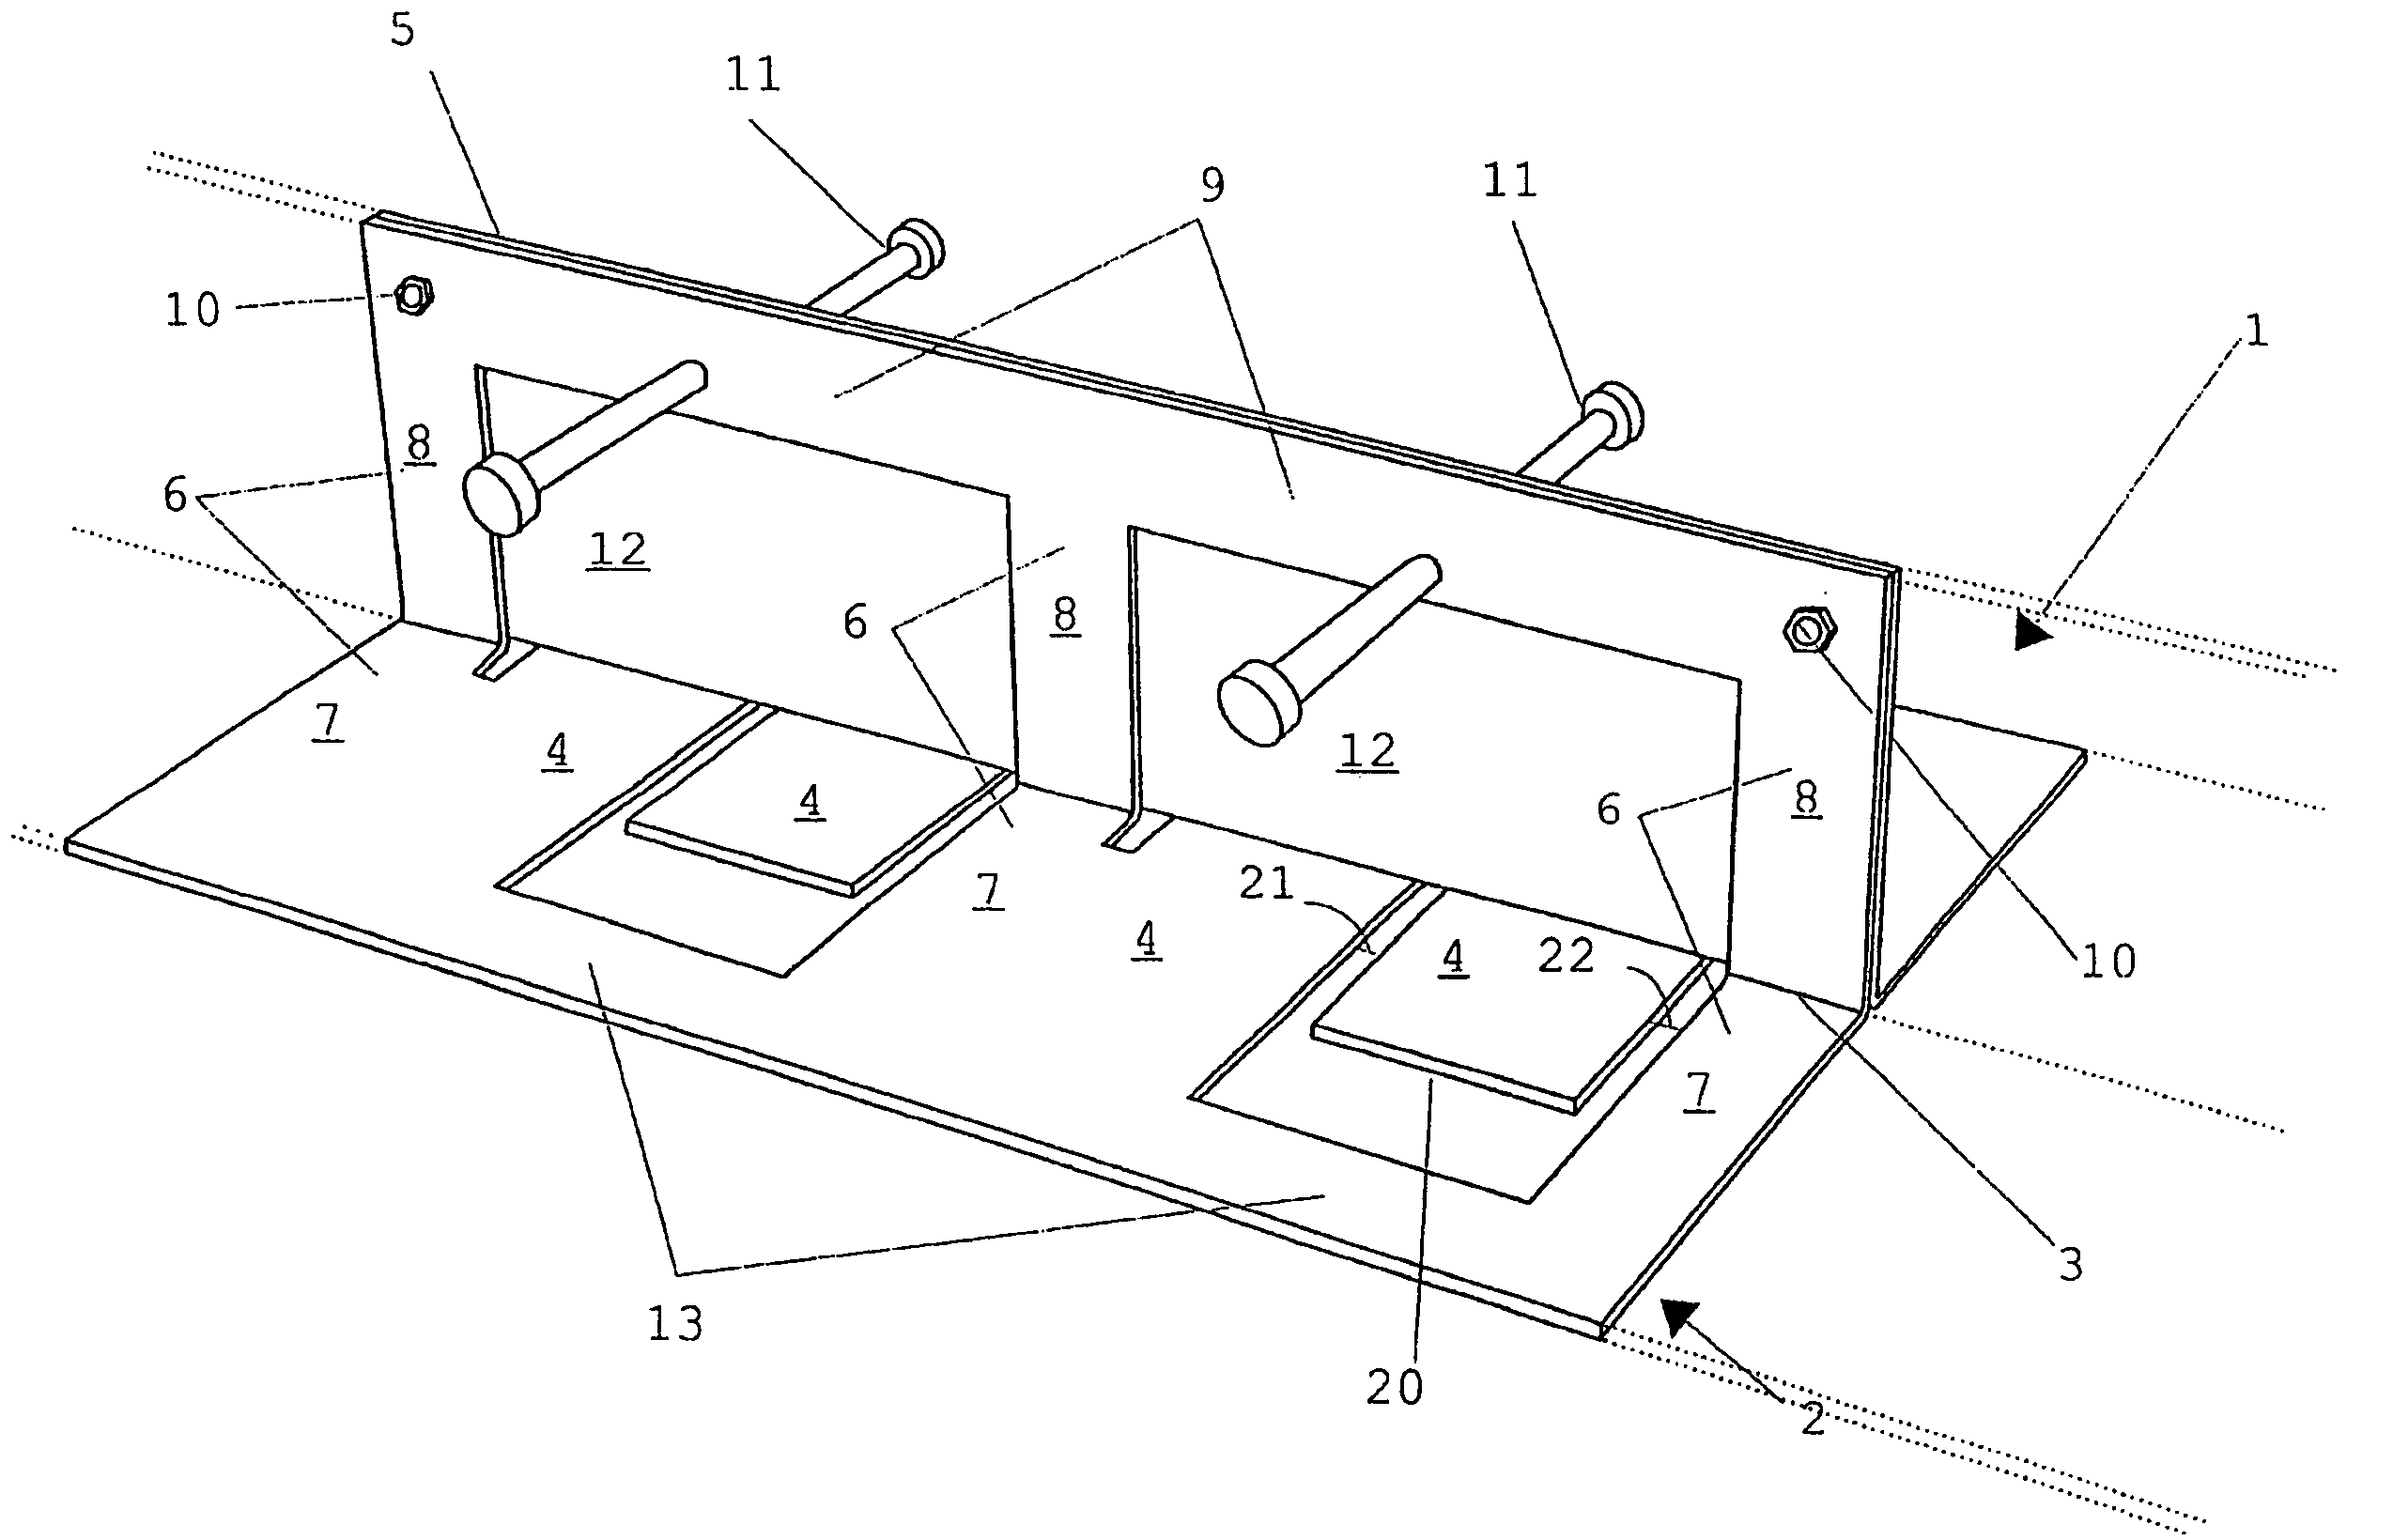 Device for equipping an expansion joint, in particular an expansion joint between concrete slabs